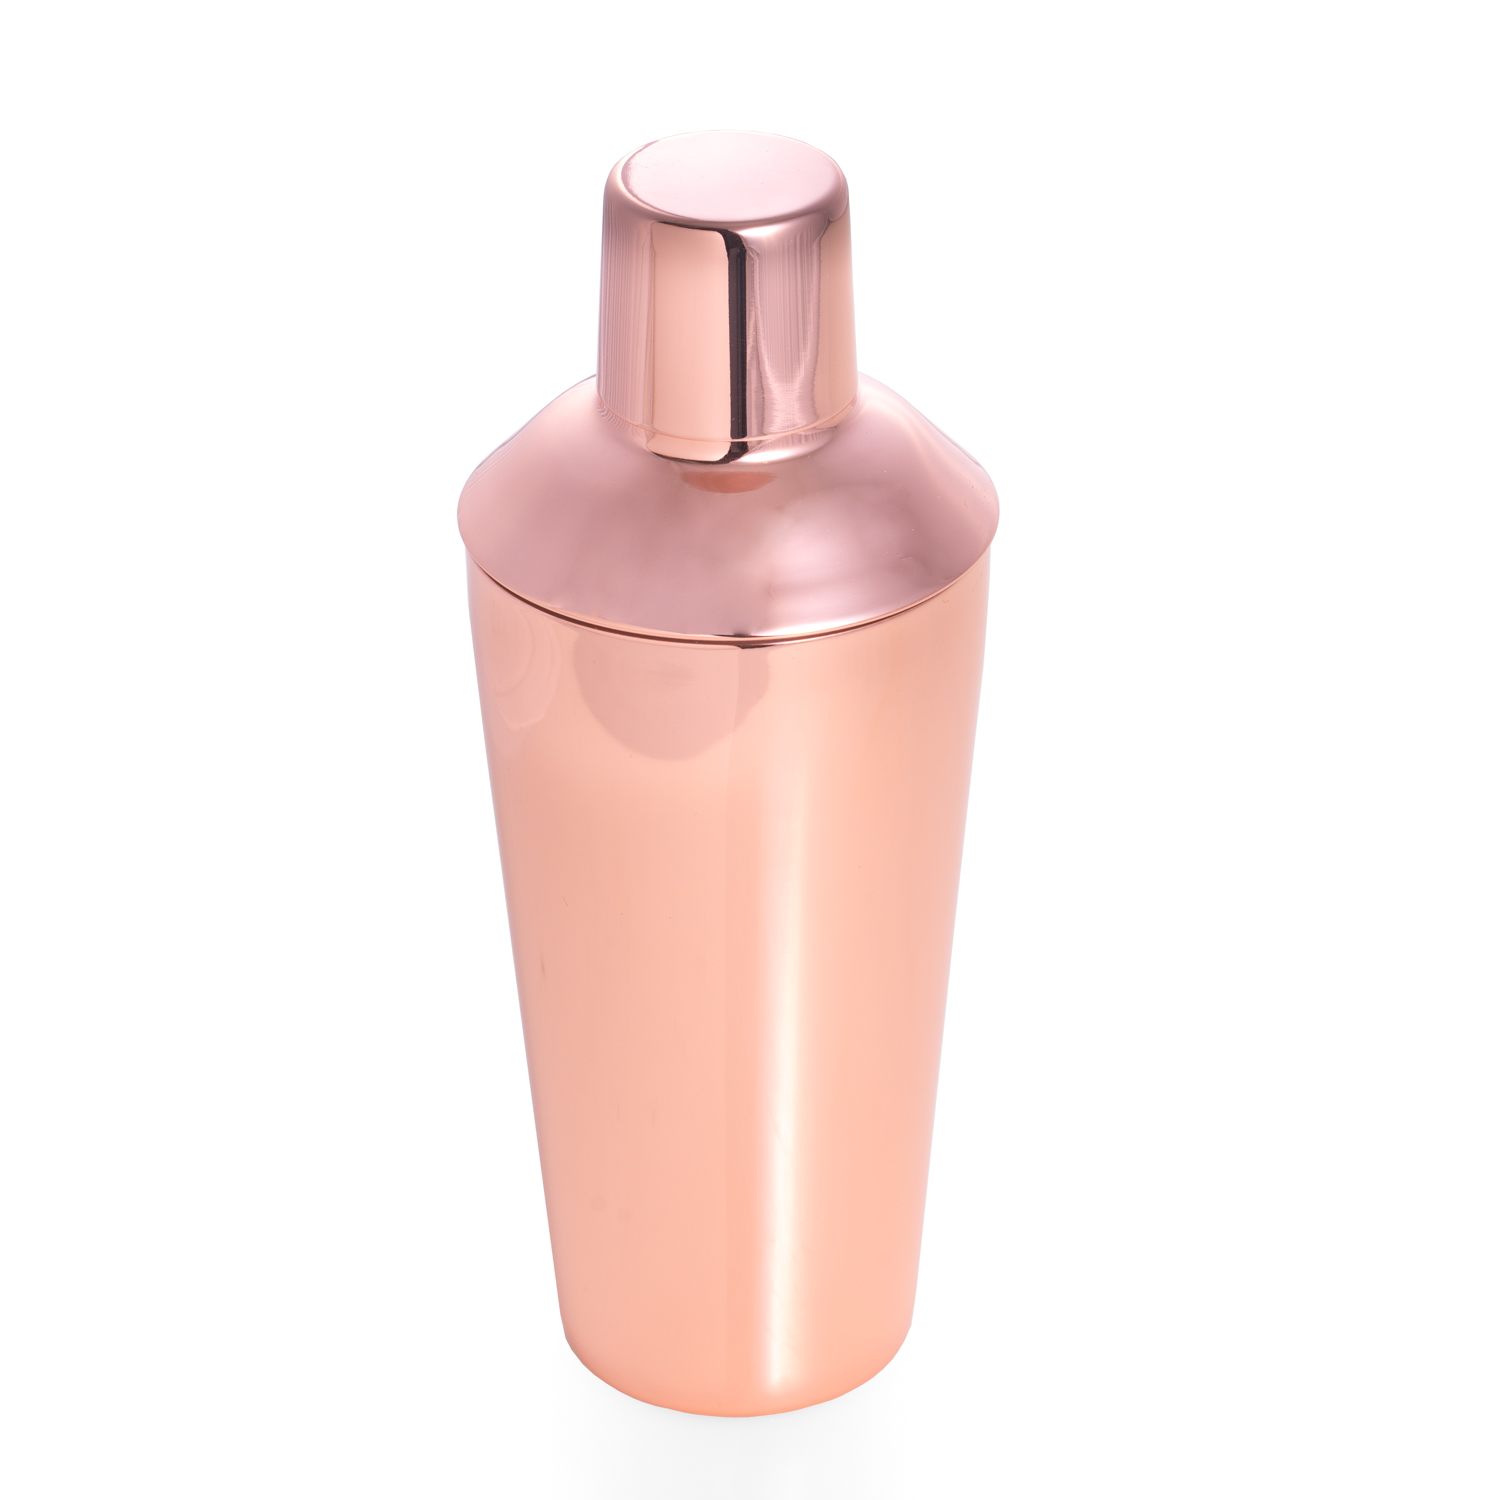 25 oz. Copper Plated Shaker